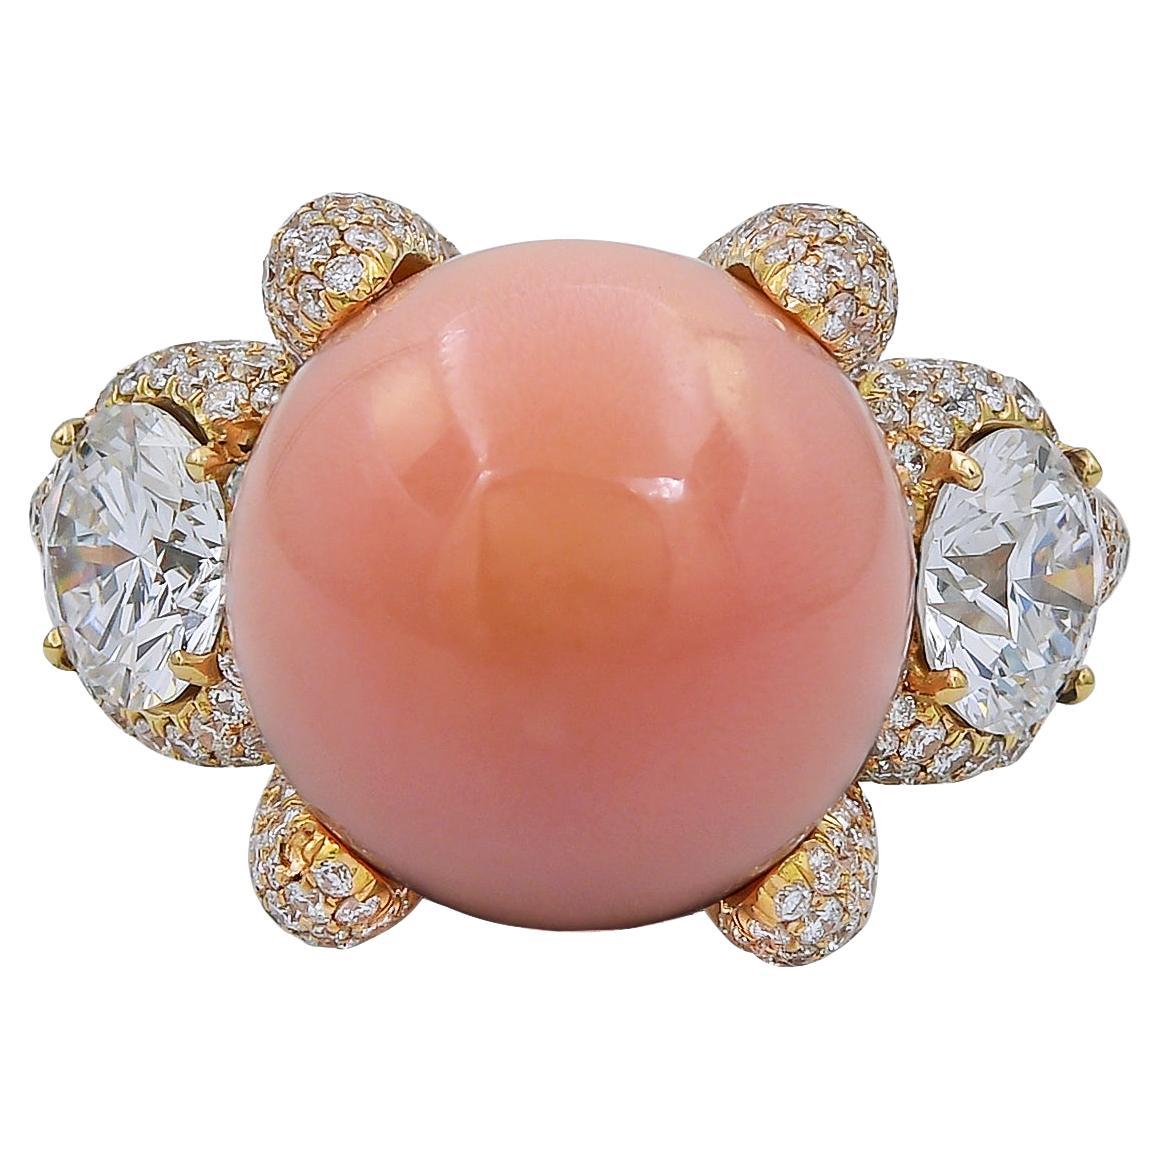 Spectra Fine Jewelry Conch Pearl Diamond Cocktail Ring in 18k Yellow Gold